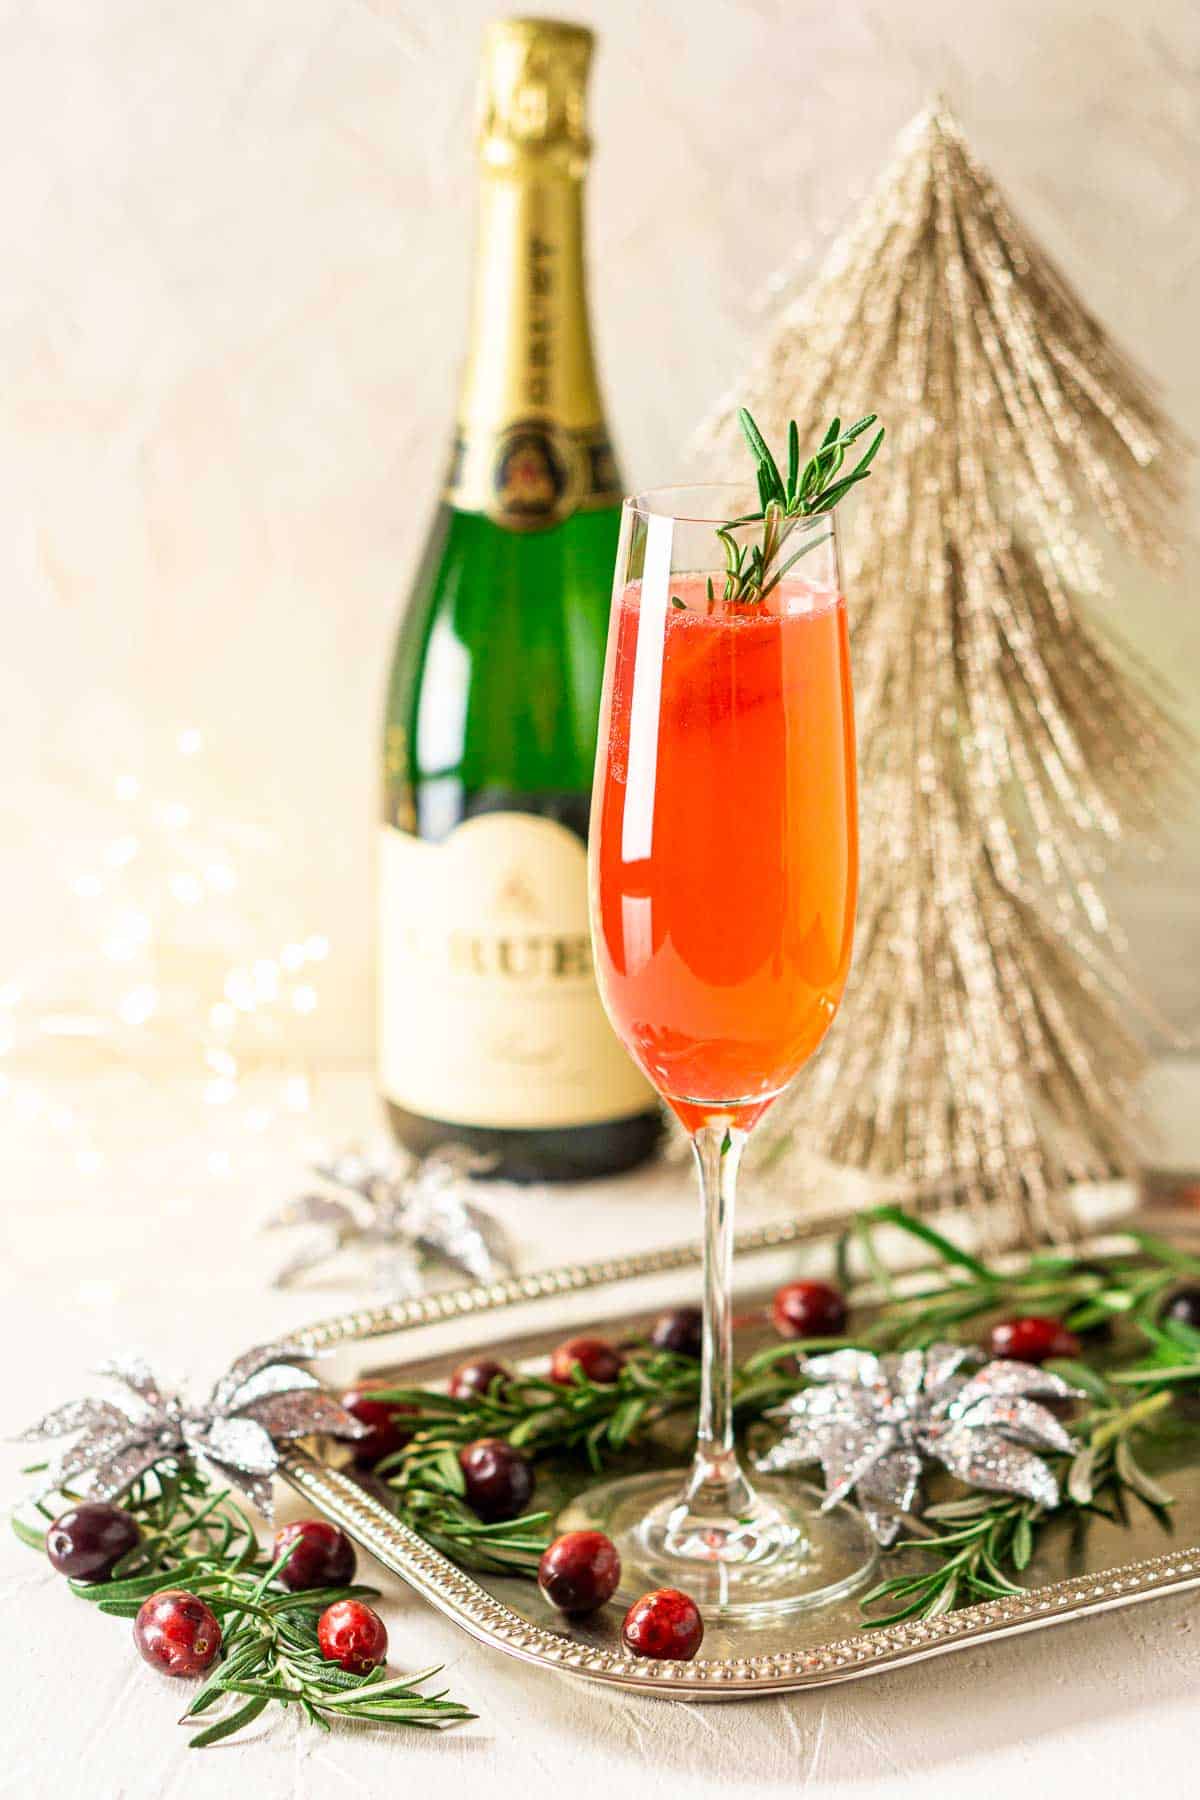 A cranberry French 75 on a silver platter with rosemary and cranberries around it with a bottle of Champagne in the background.